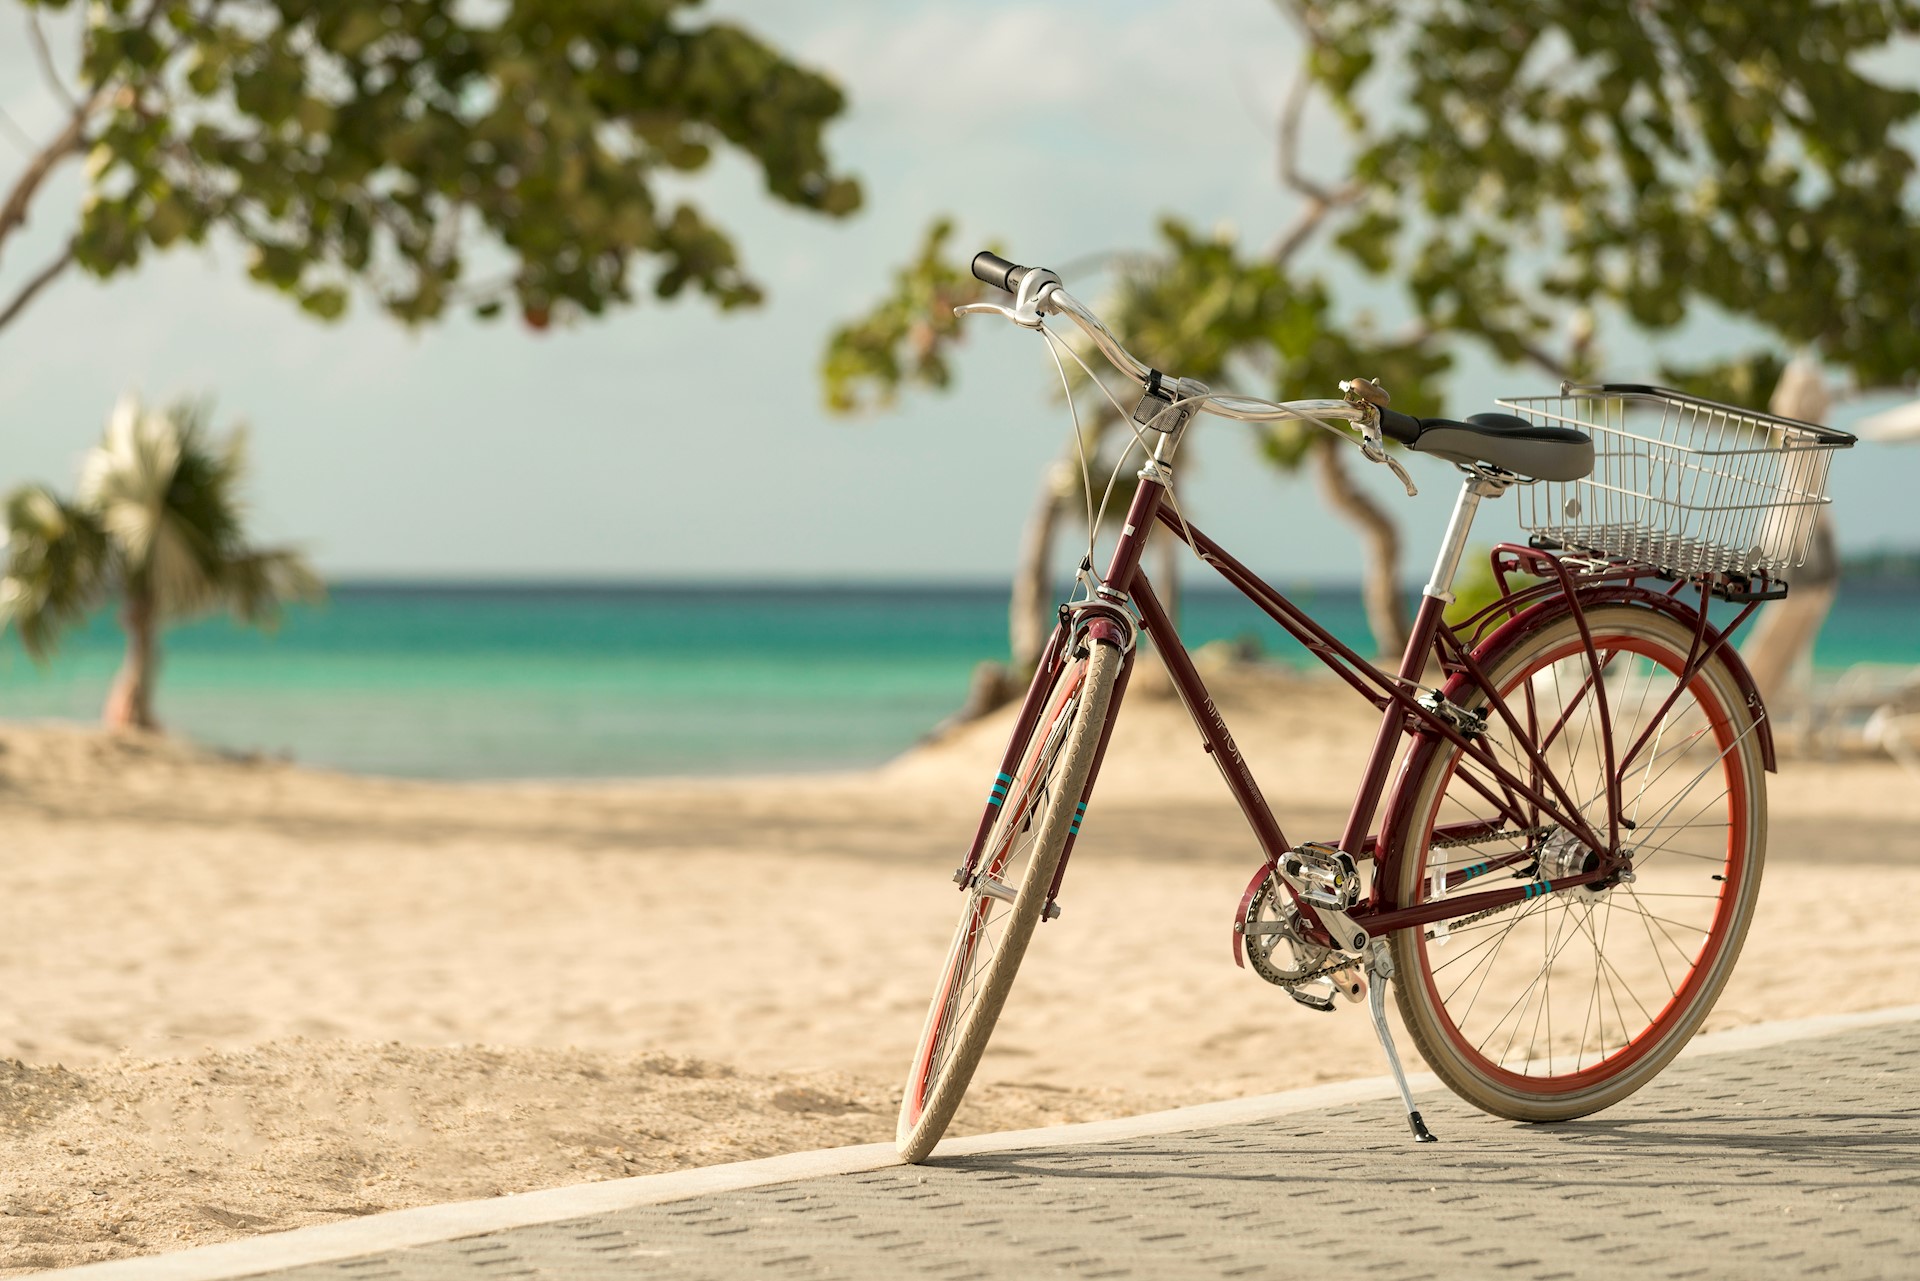 Cycling to enjoy the Cayman Islands